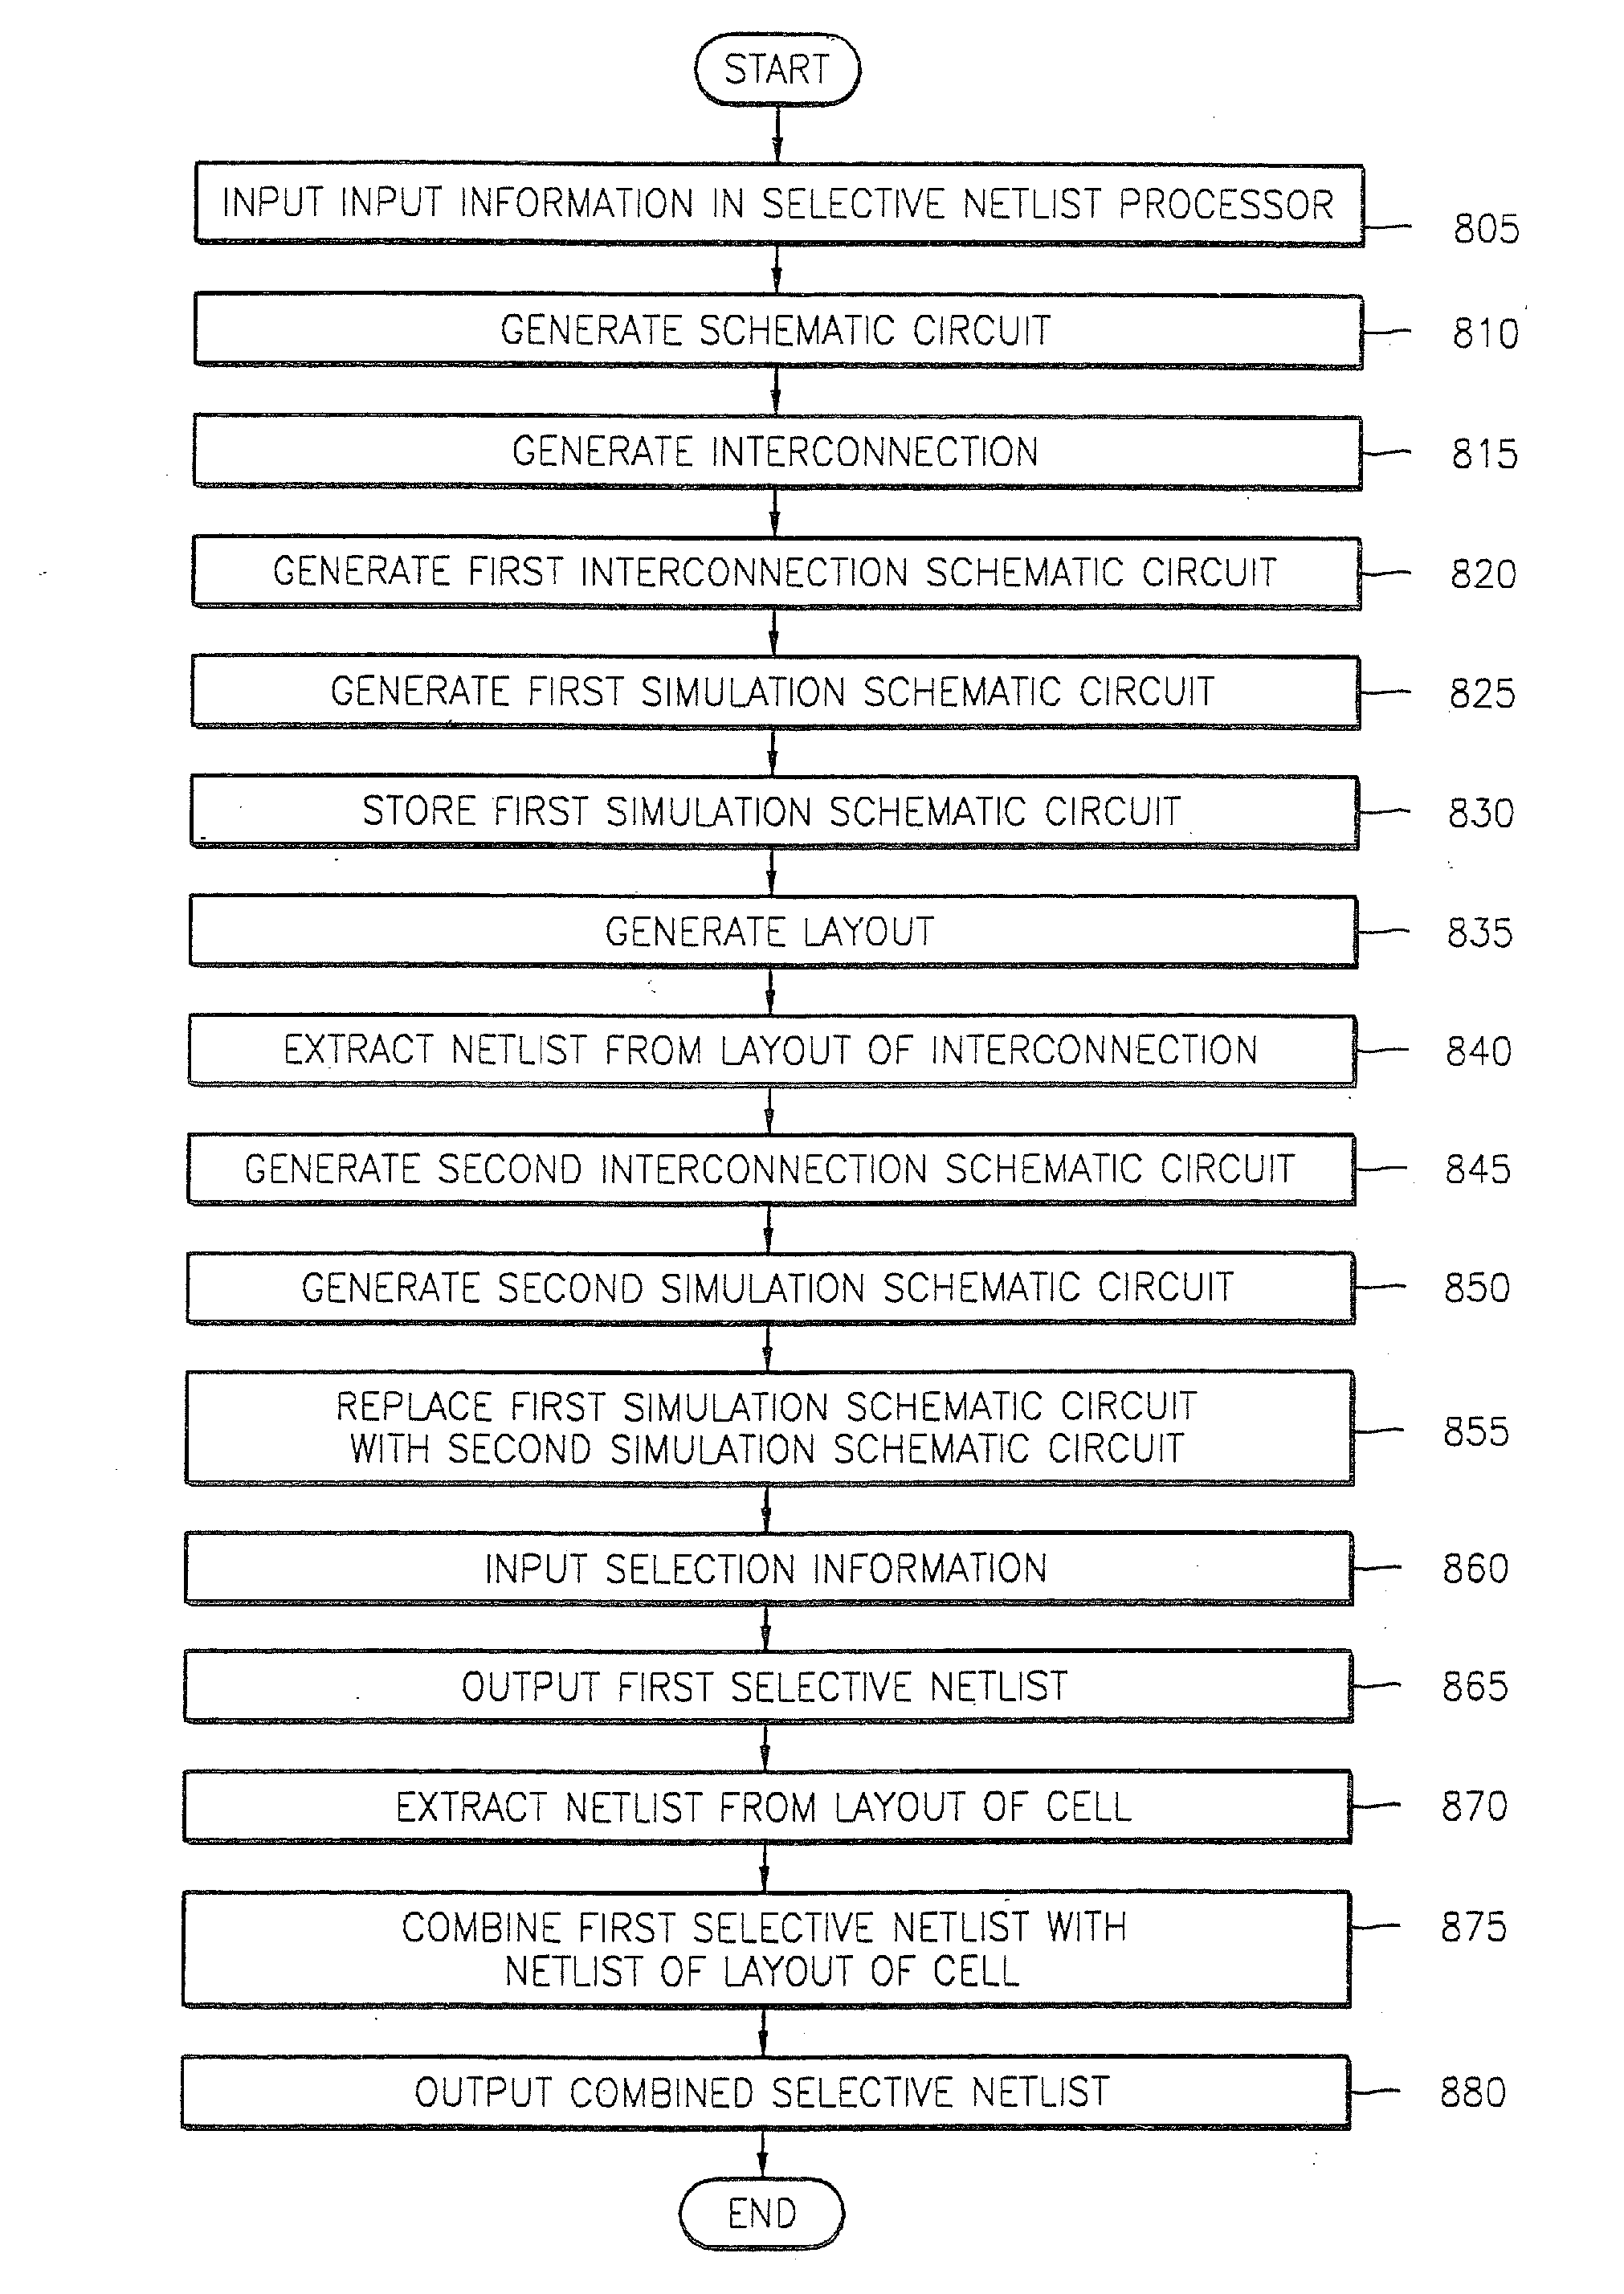 Methods, Apparatus and Computer Program Products for Generating Selective Netlists that Include Interconnection Influences at Pre-Layout and Post-Layout Design Stages